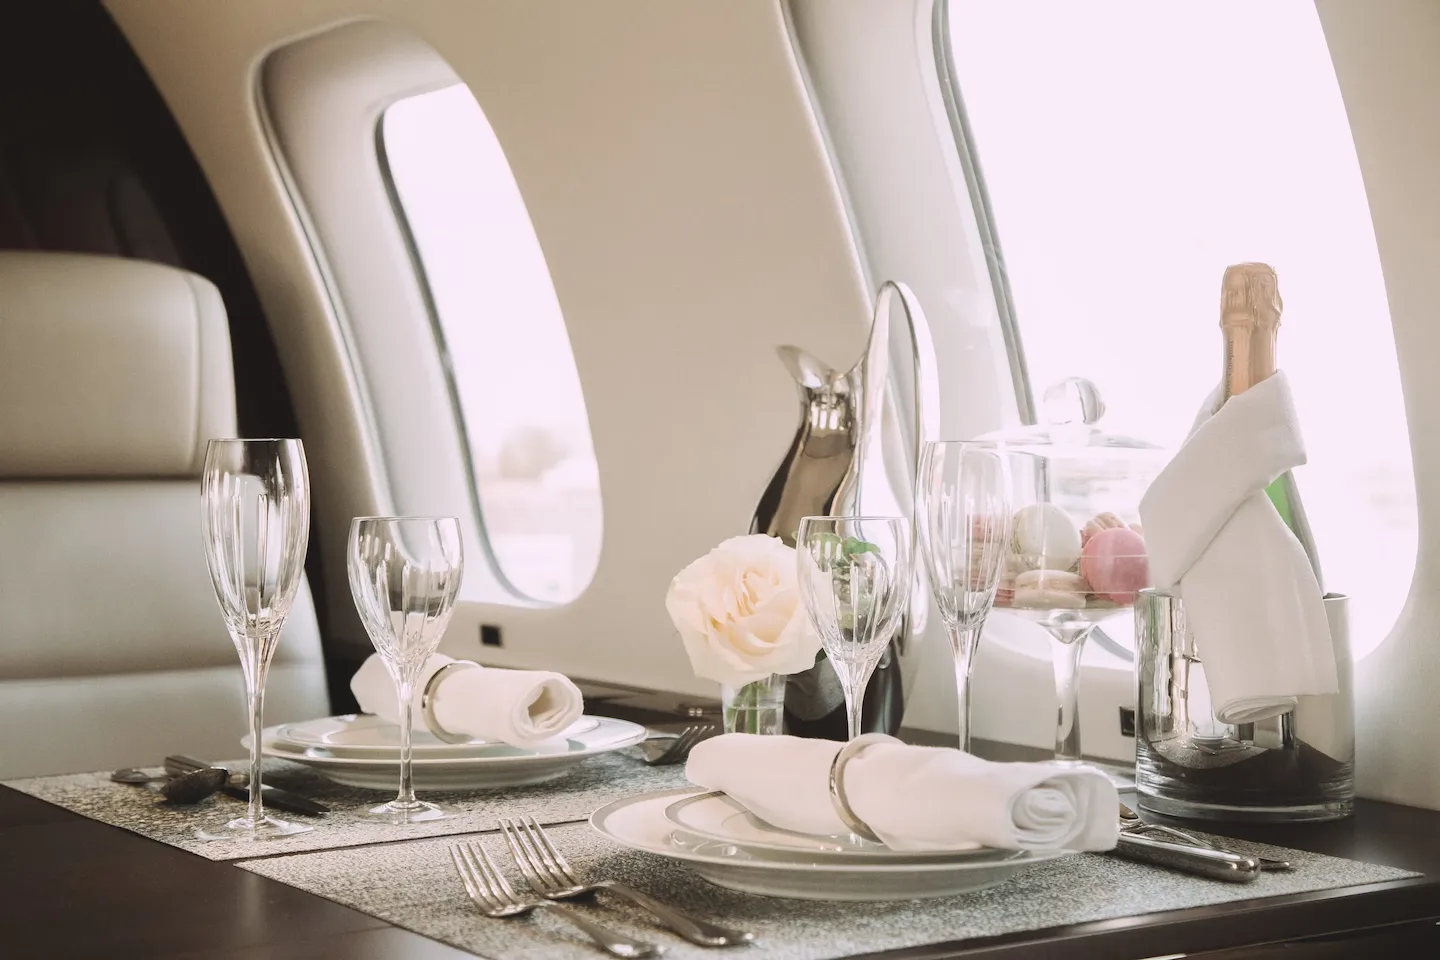 A full dining set up on a table inside of a private jet, featuring a bottle of champagne.